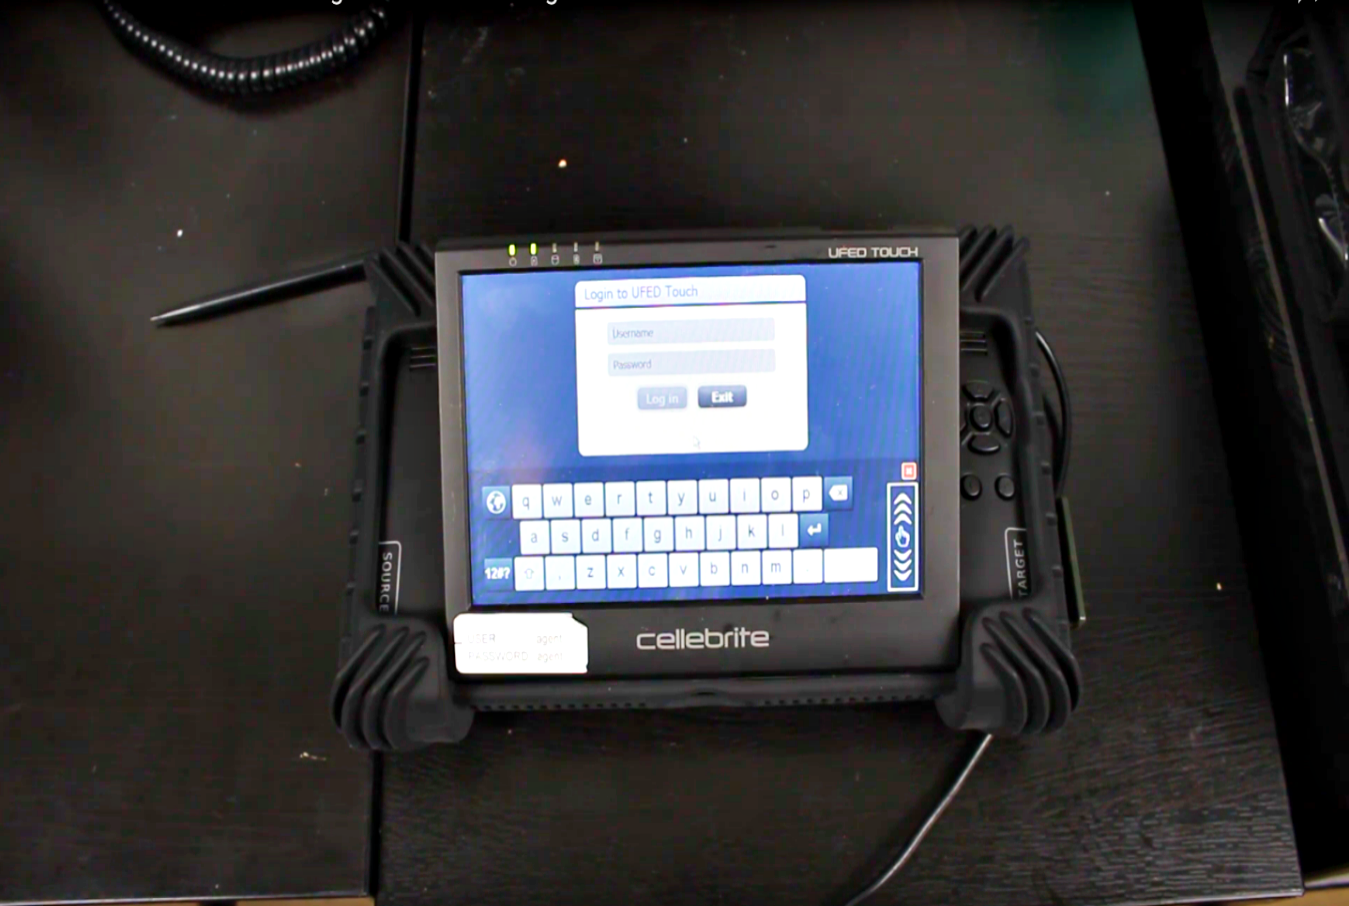 iPhone hacking tool Cellebrite being sold on eBay for $100